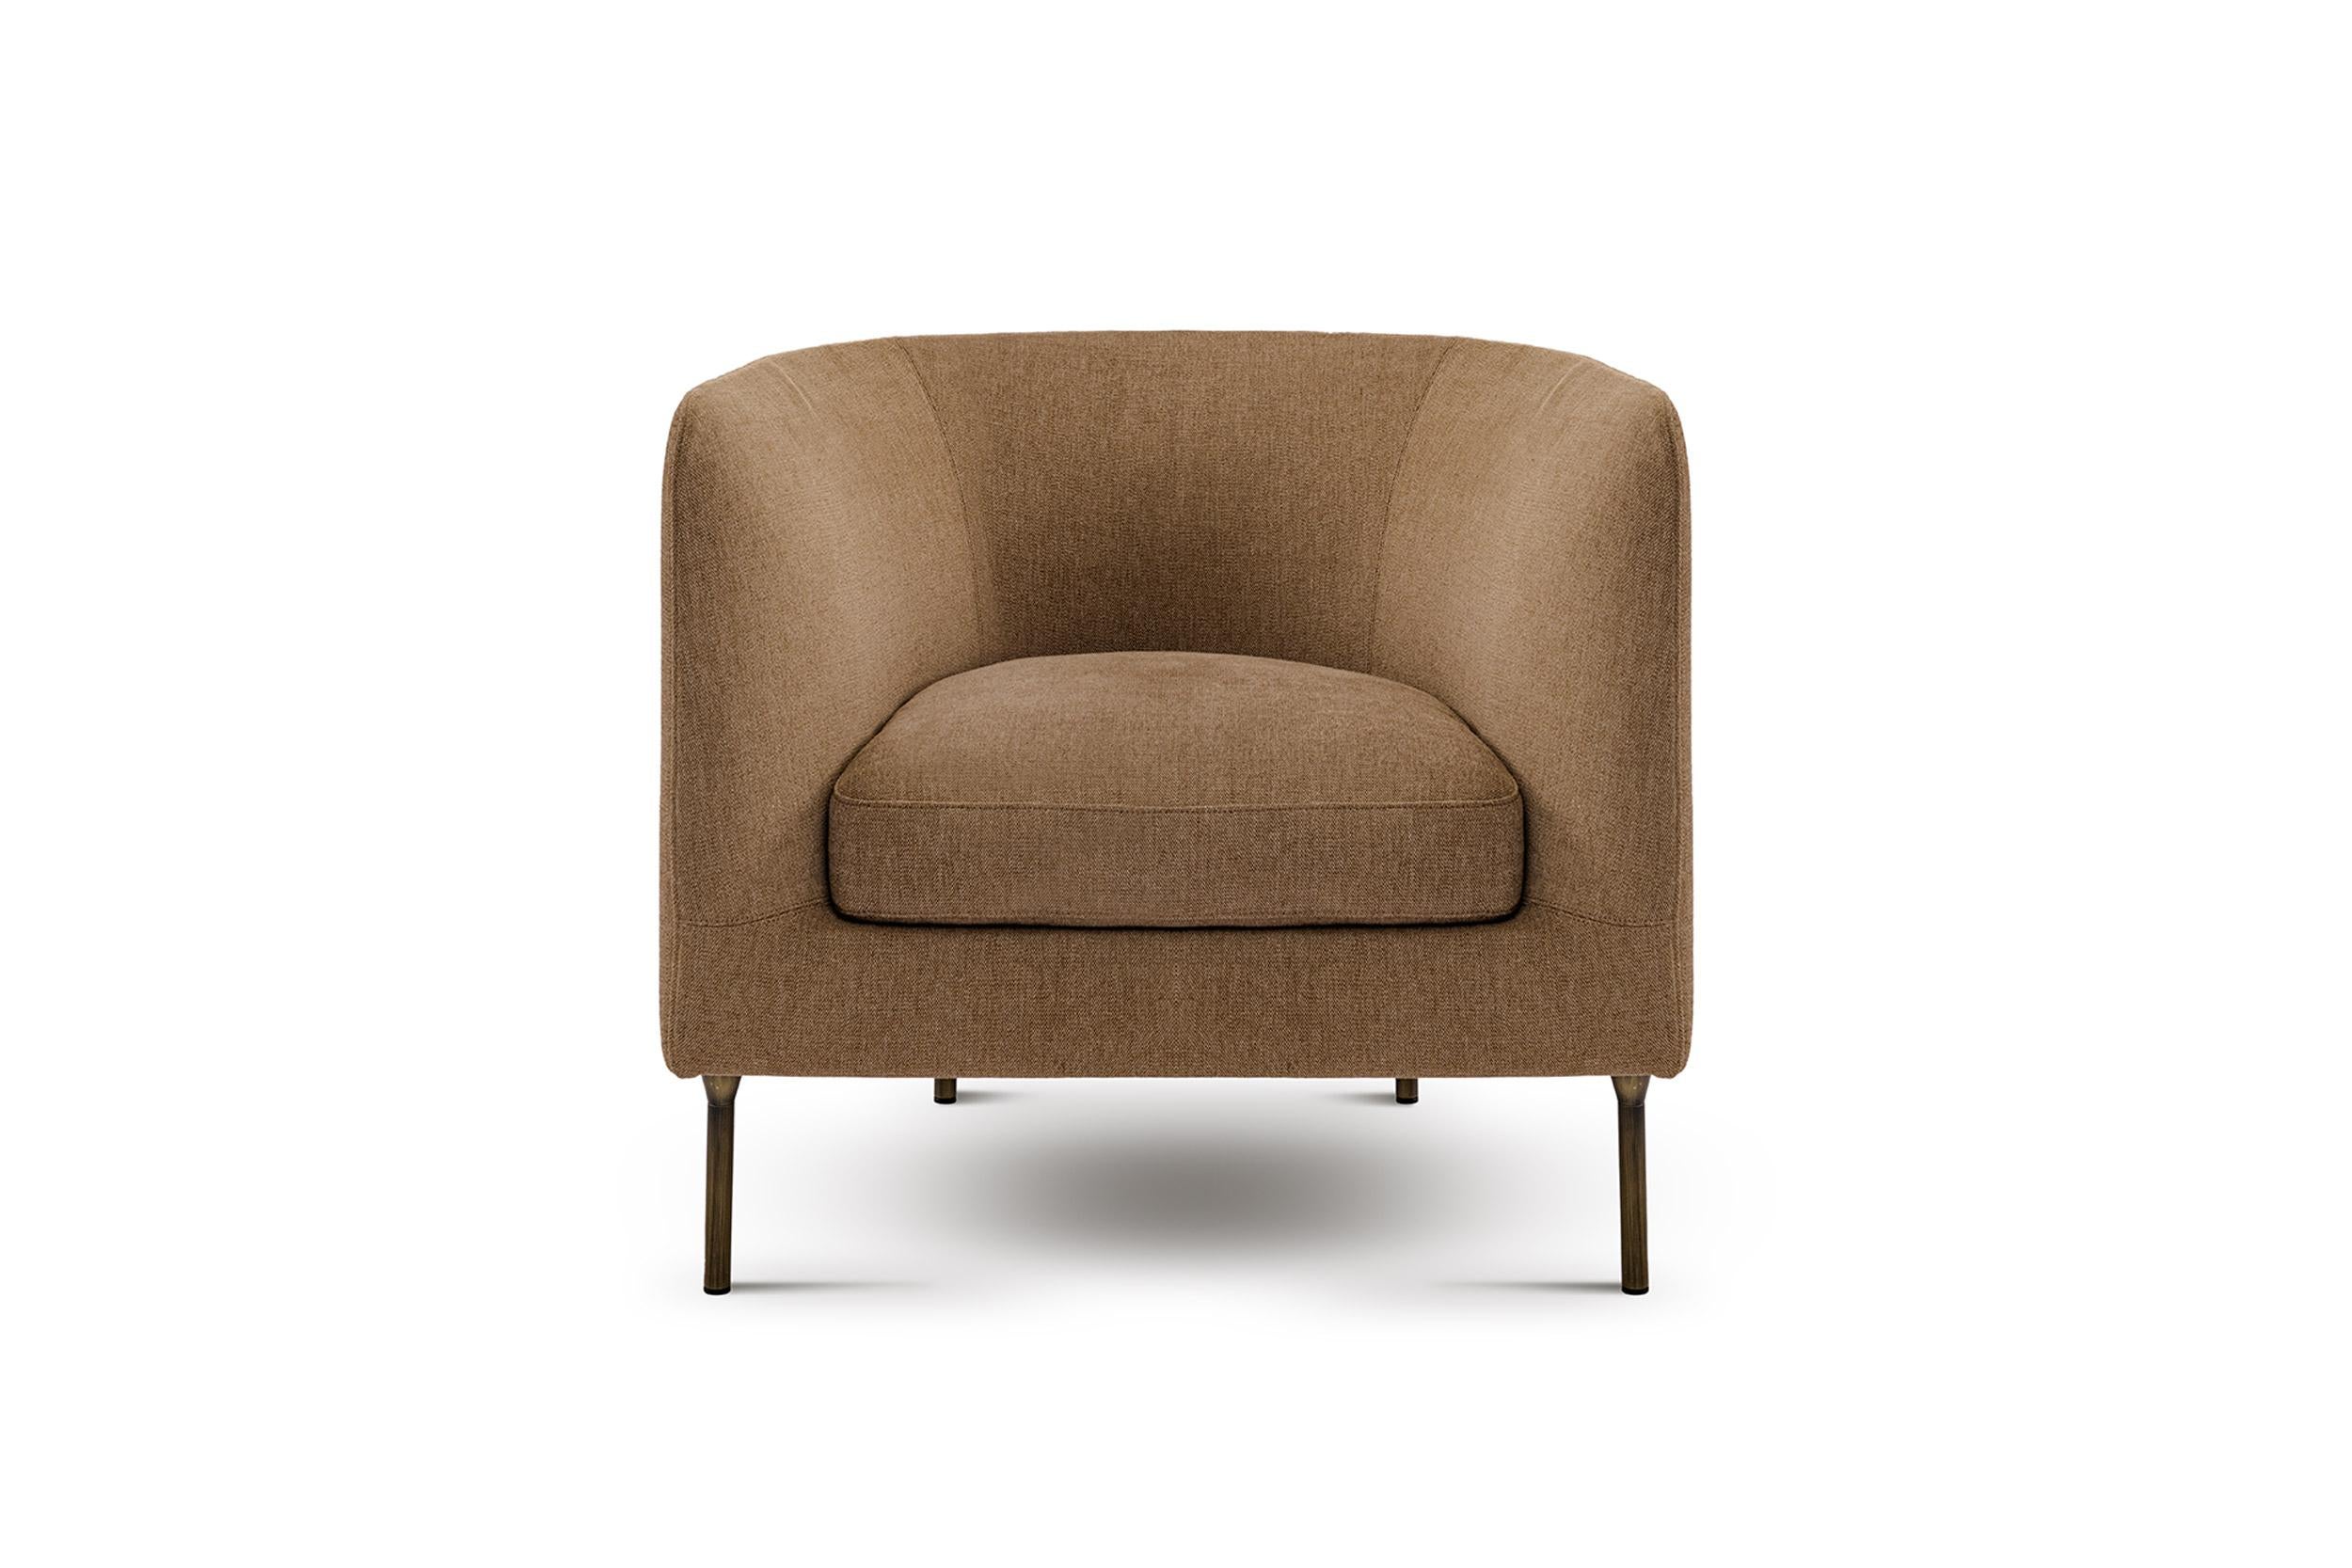 Featuring smooth surfaces and soft down-filled cushions the Delta is a fresh and young addition to the Bensen line. 
Delta is sculptural on its own yet versatile enough to work in any combined setting. 

The comfort of the Delta series is created